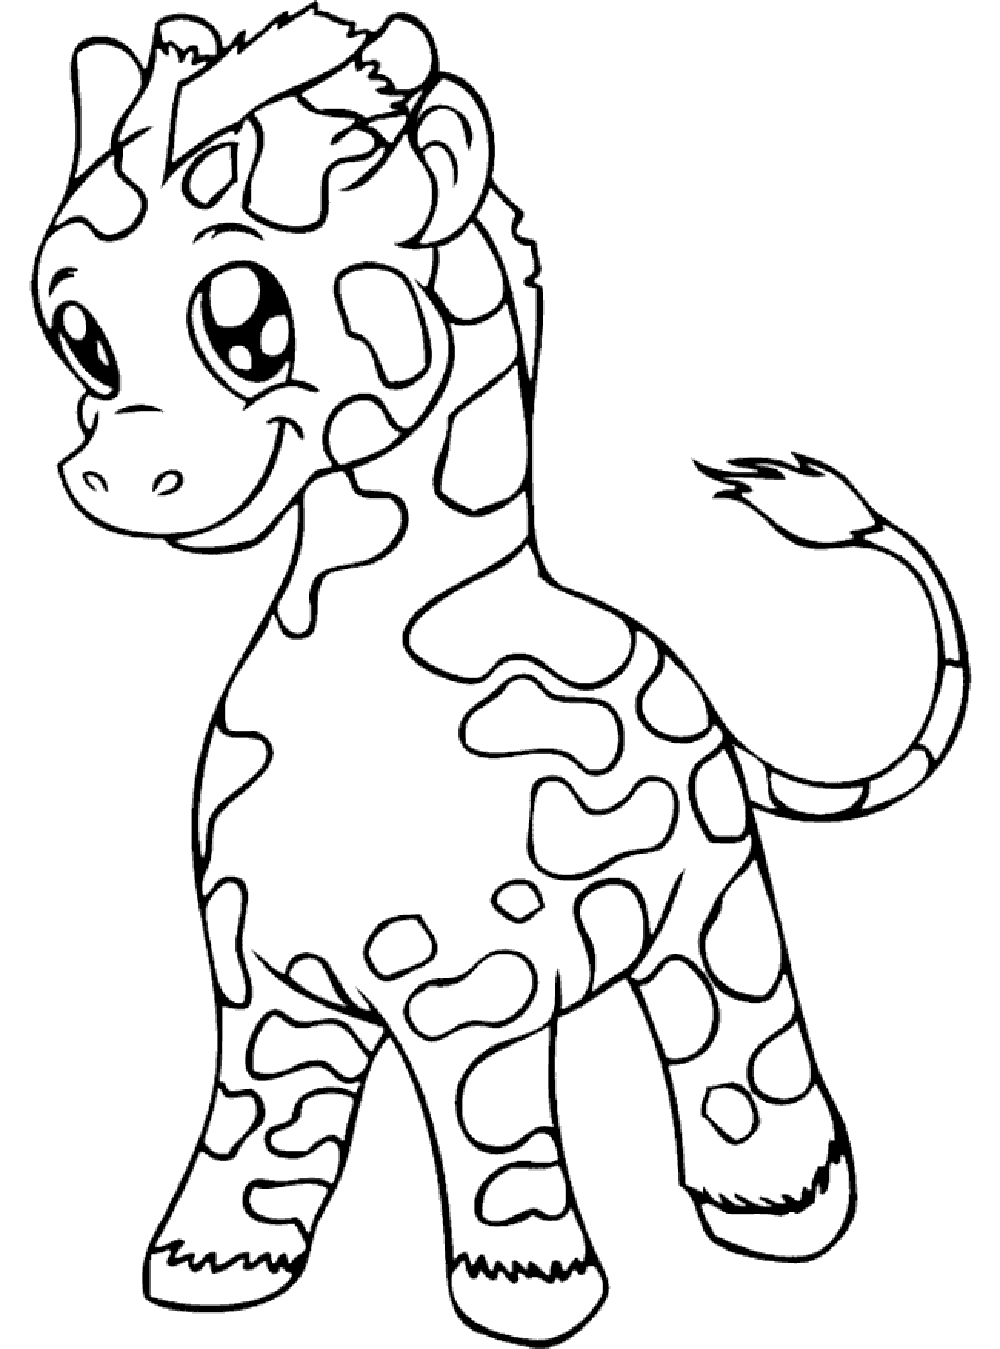 Giraffes Kids Coloring Page